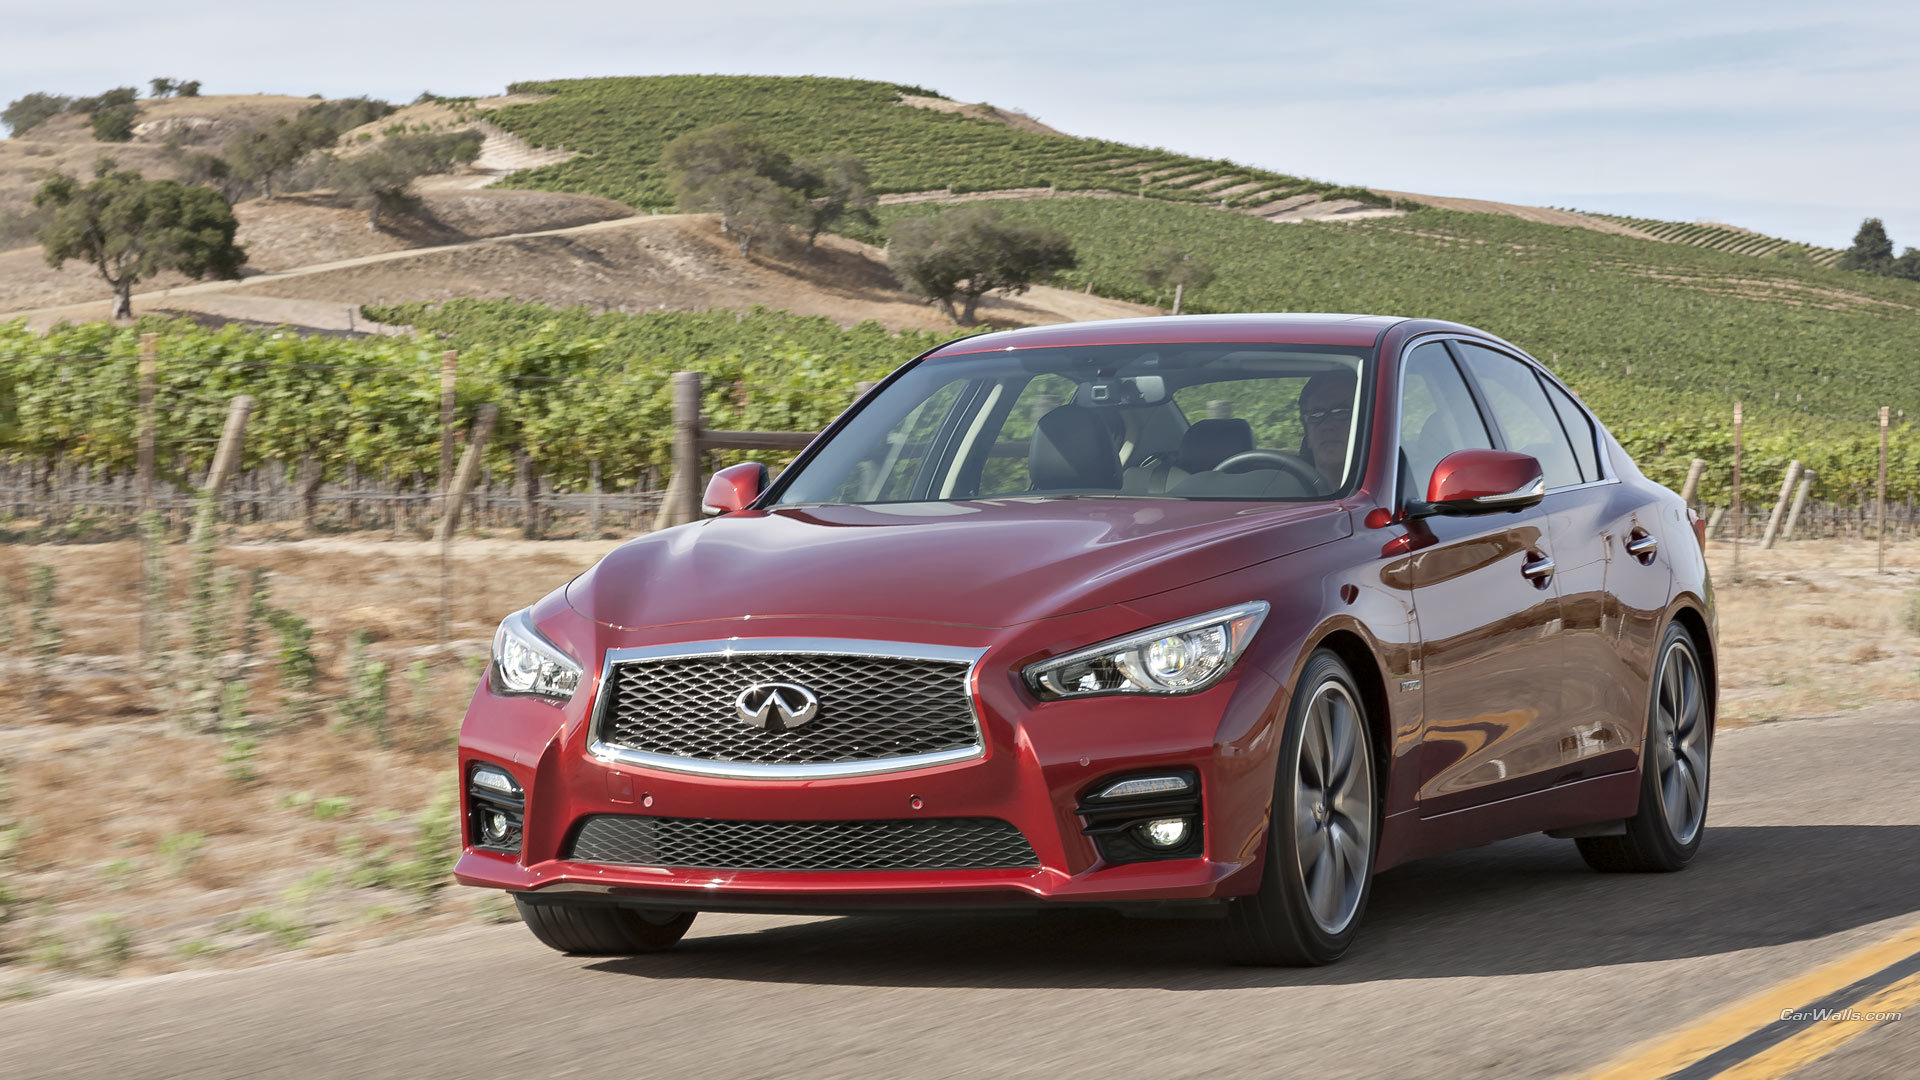 Awesome Infiniti Q50 free wallpaper ID:21859 for hd 1080p computer